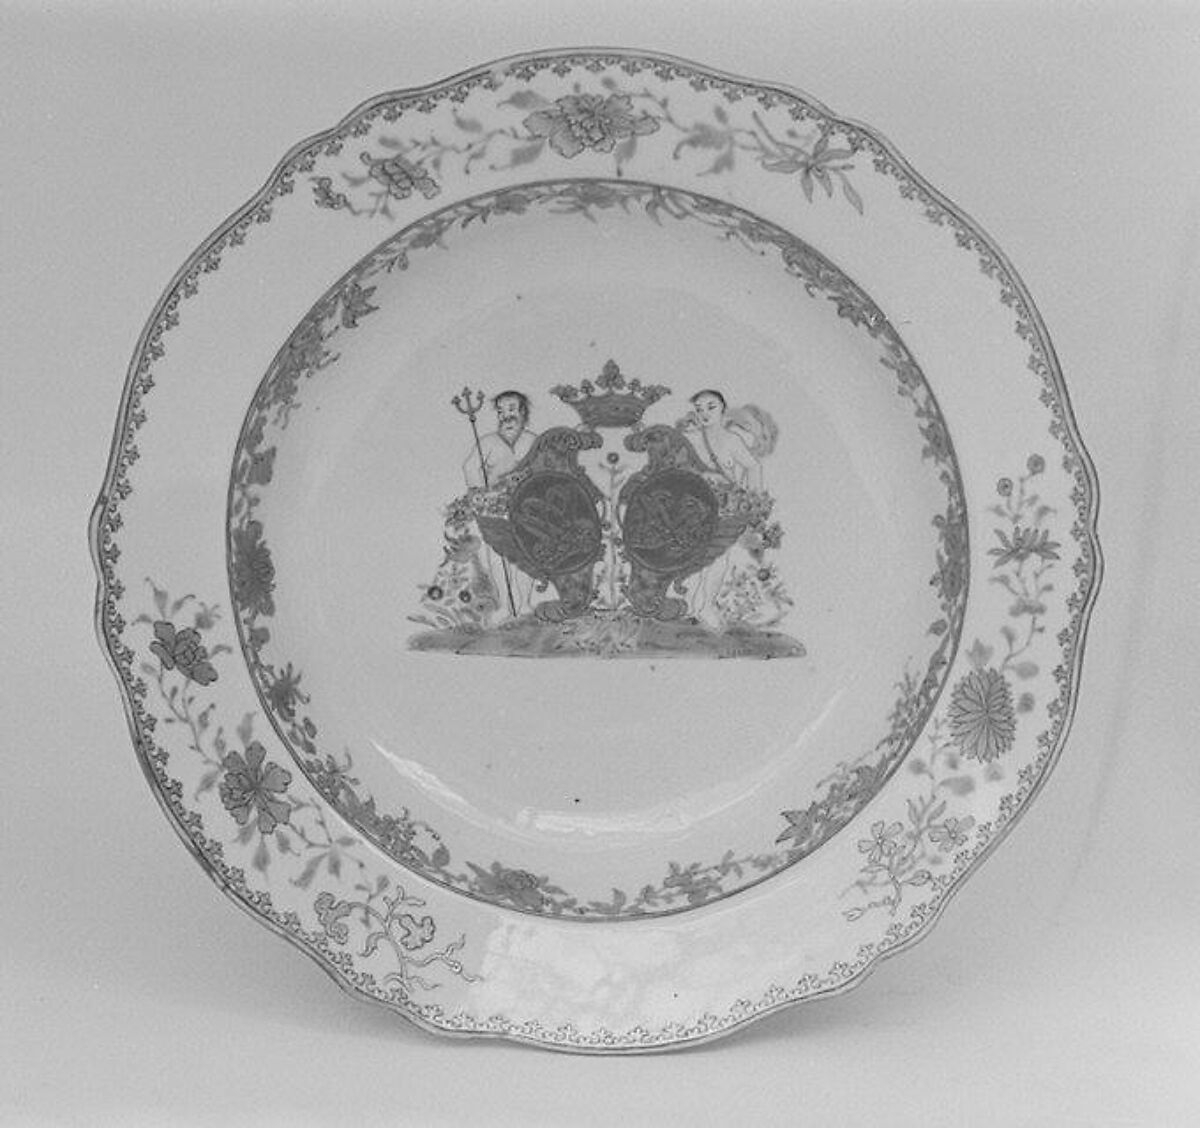 Soup plate (part of a service), Hard-paste porcelain, Chinese, for Danish market 